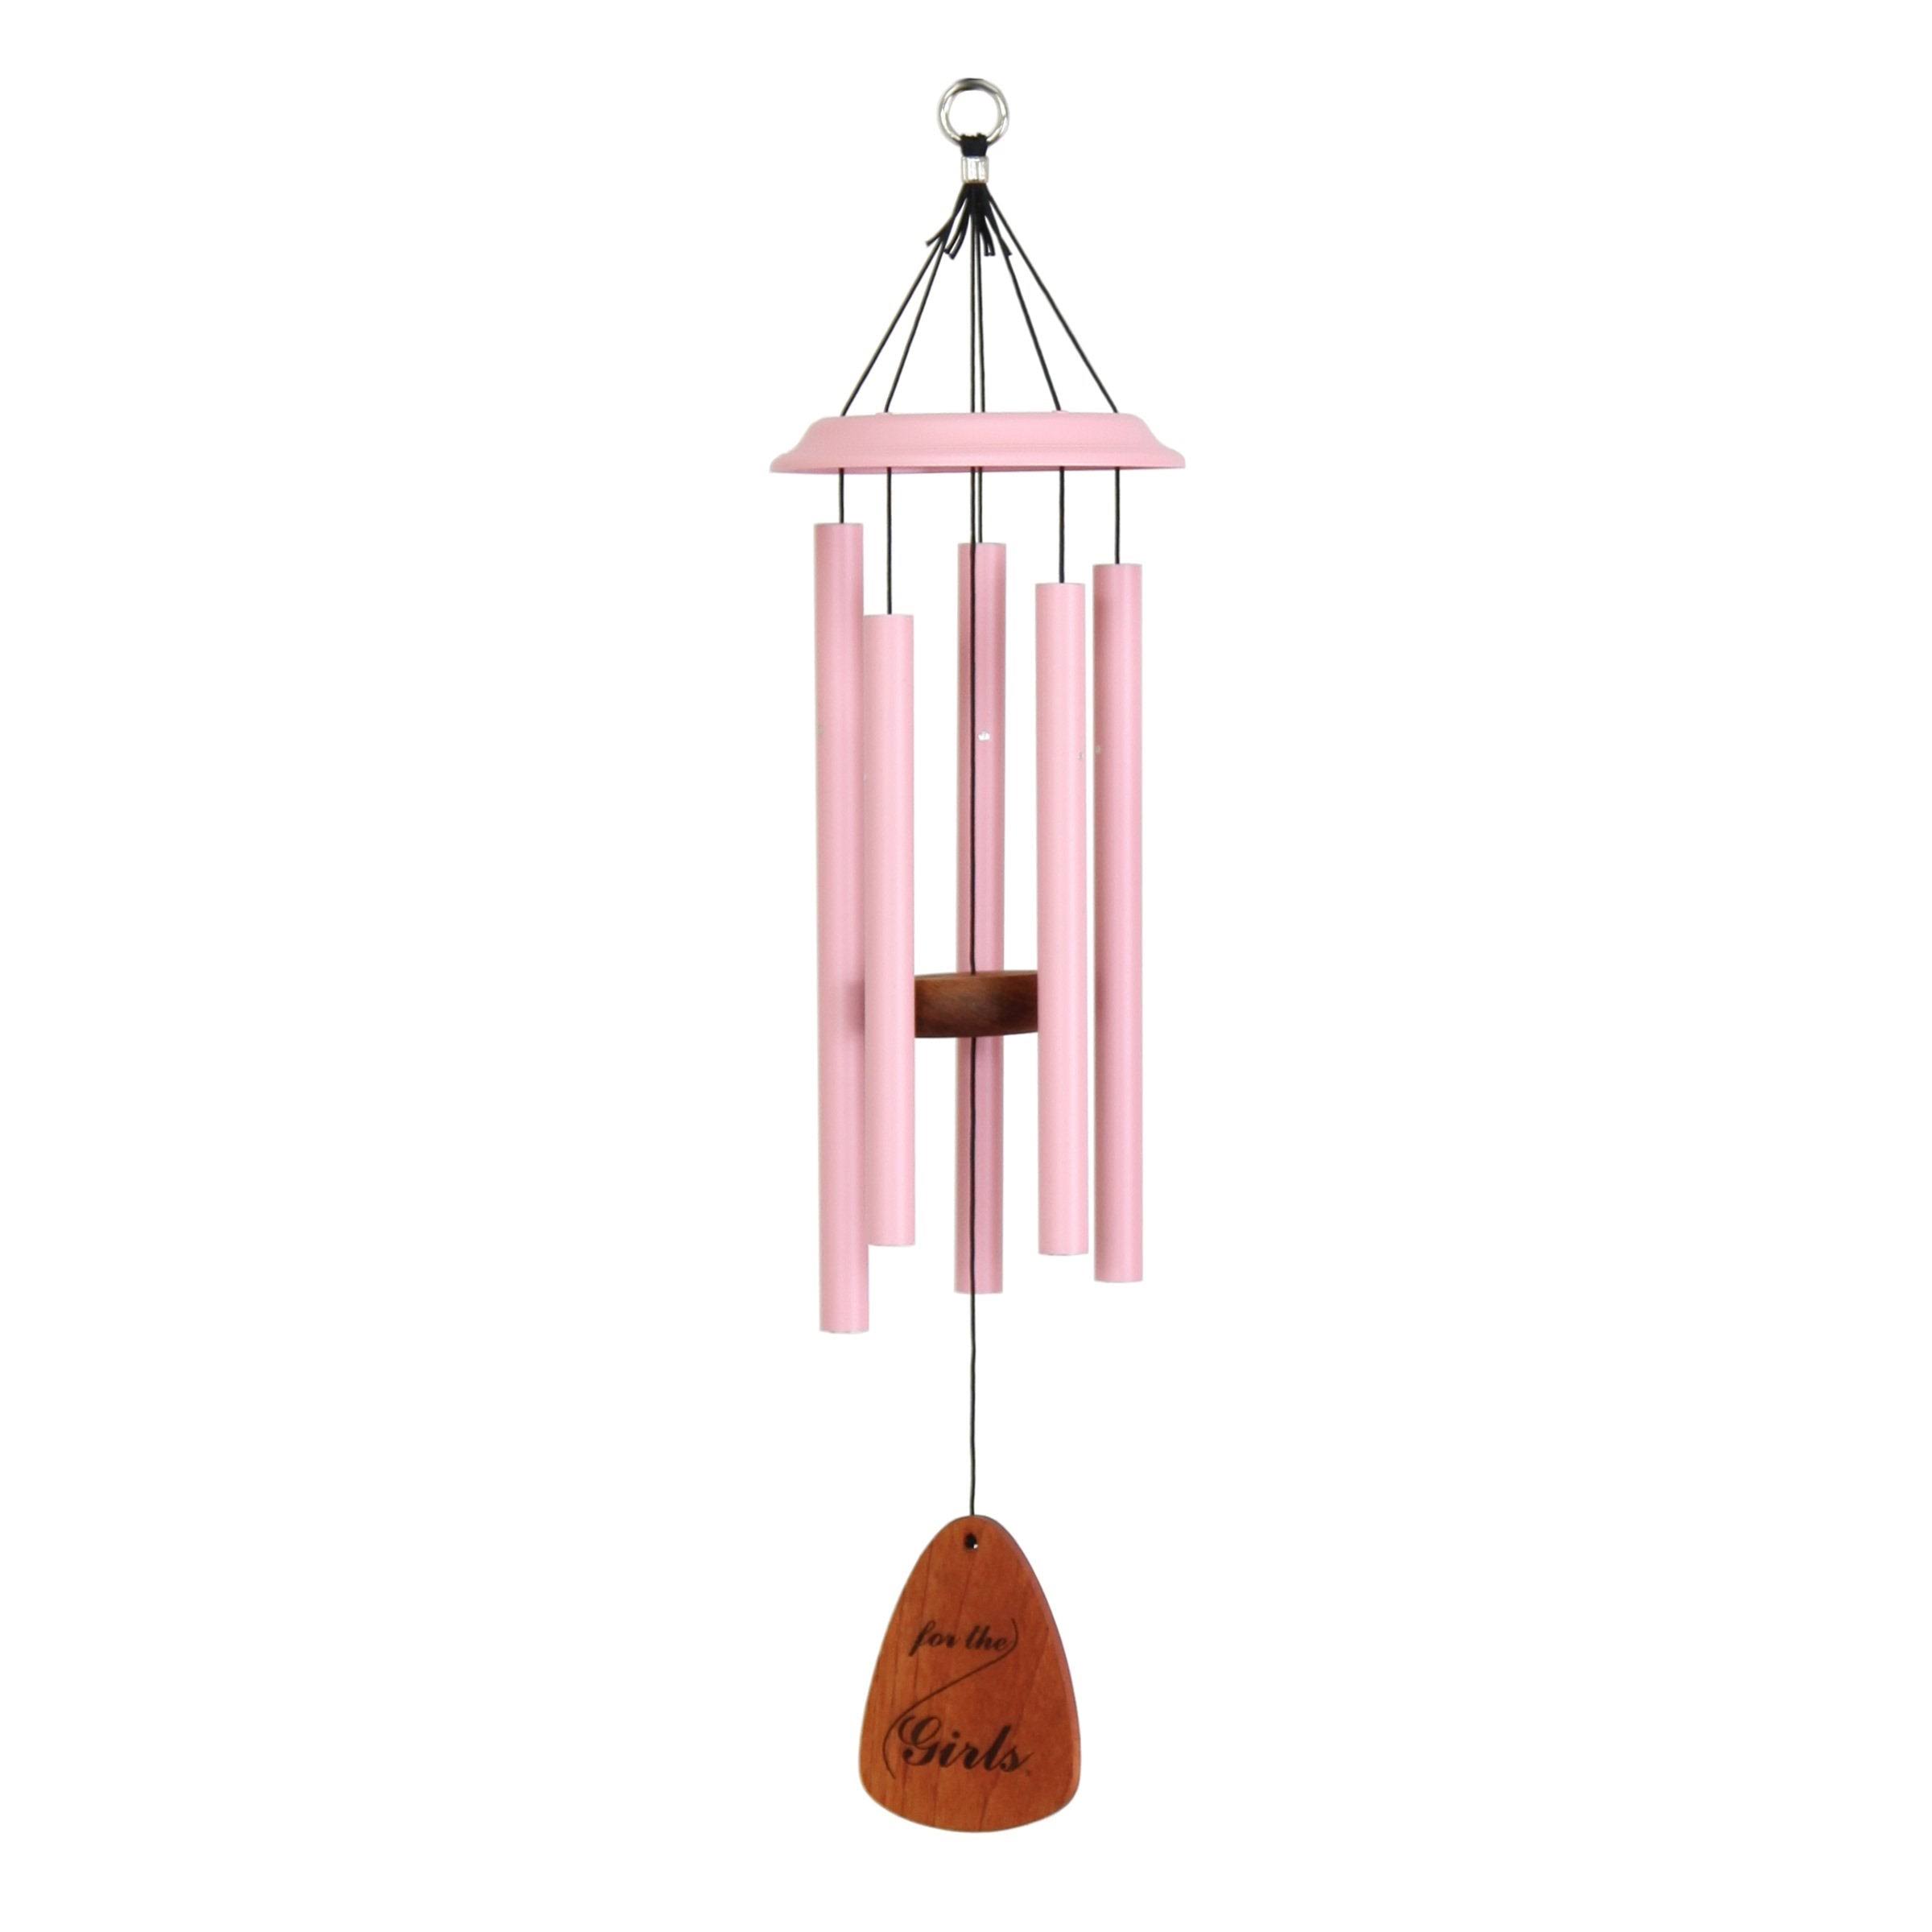 For the Girls Windchime - Pink, 34"